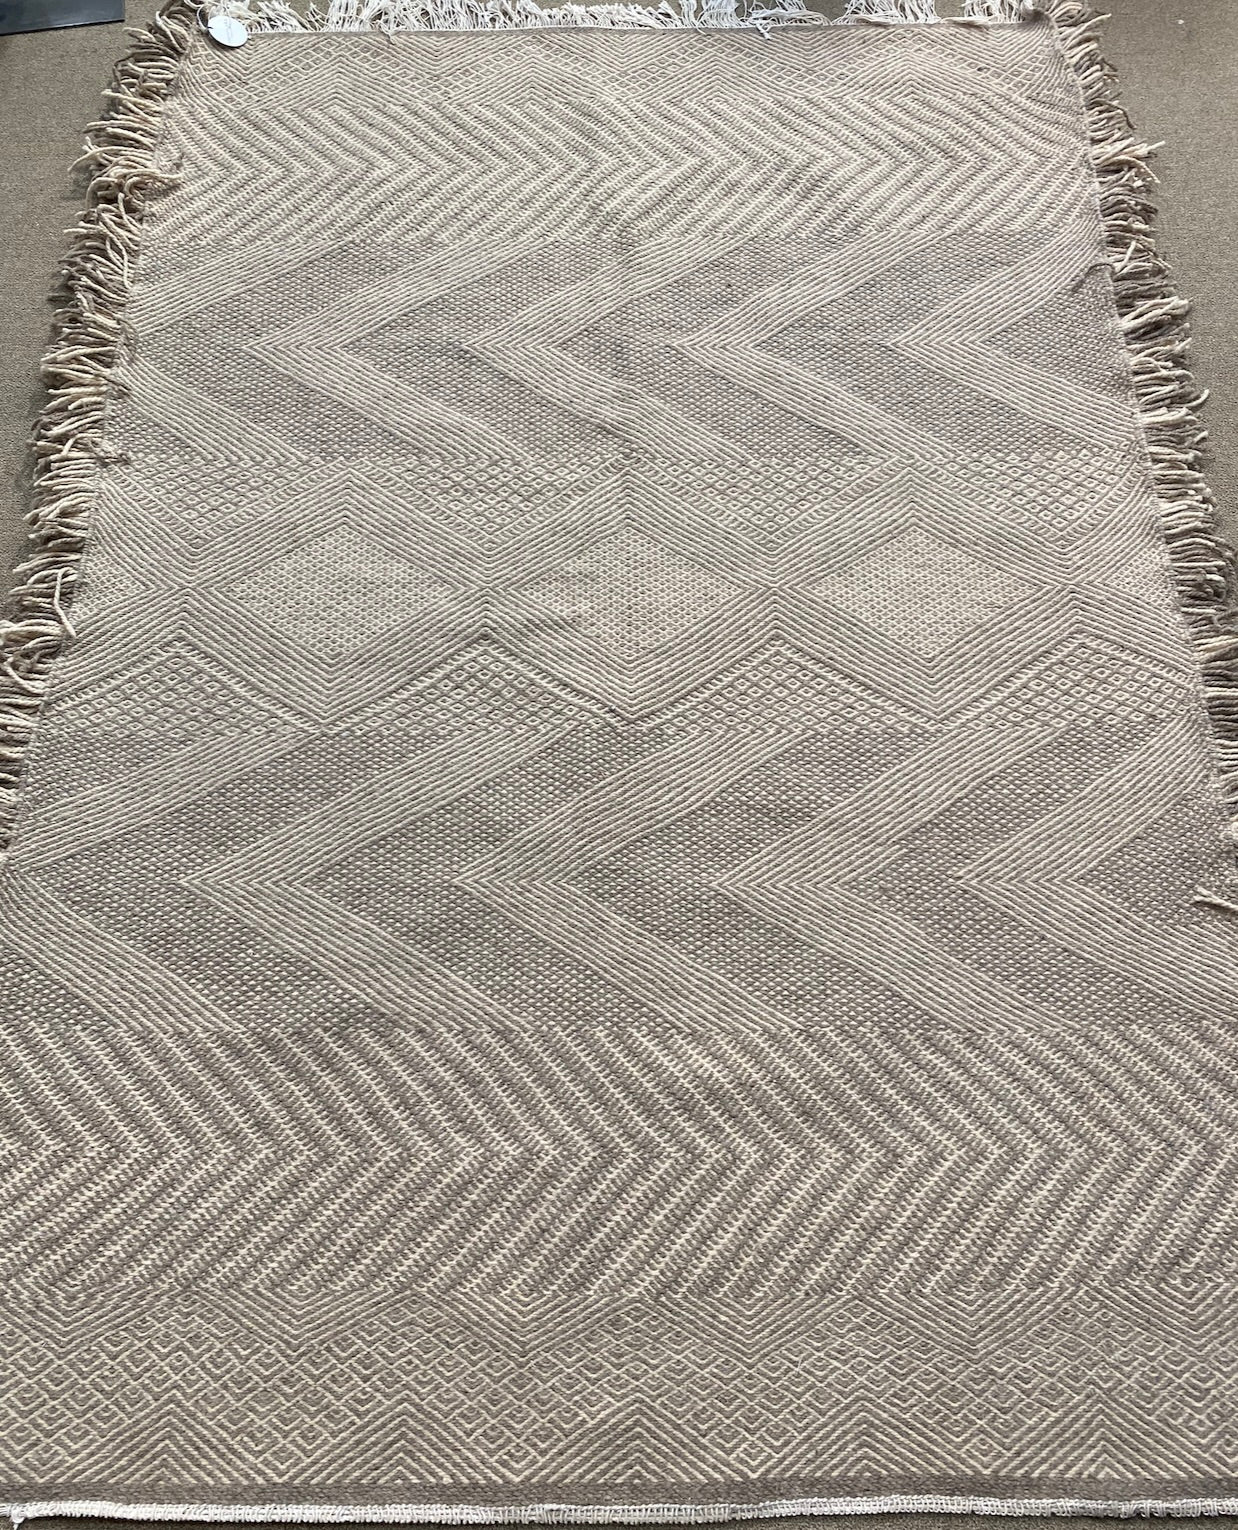 4'8"x7'1" Amazigh Banded Taupe Pattern Wool Carpet